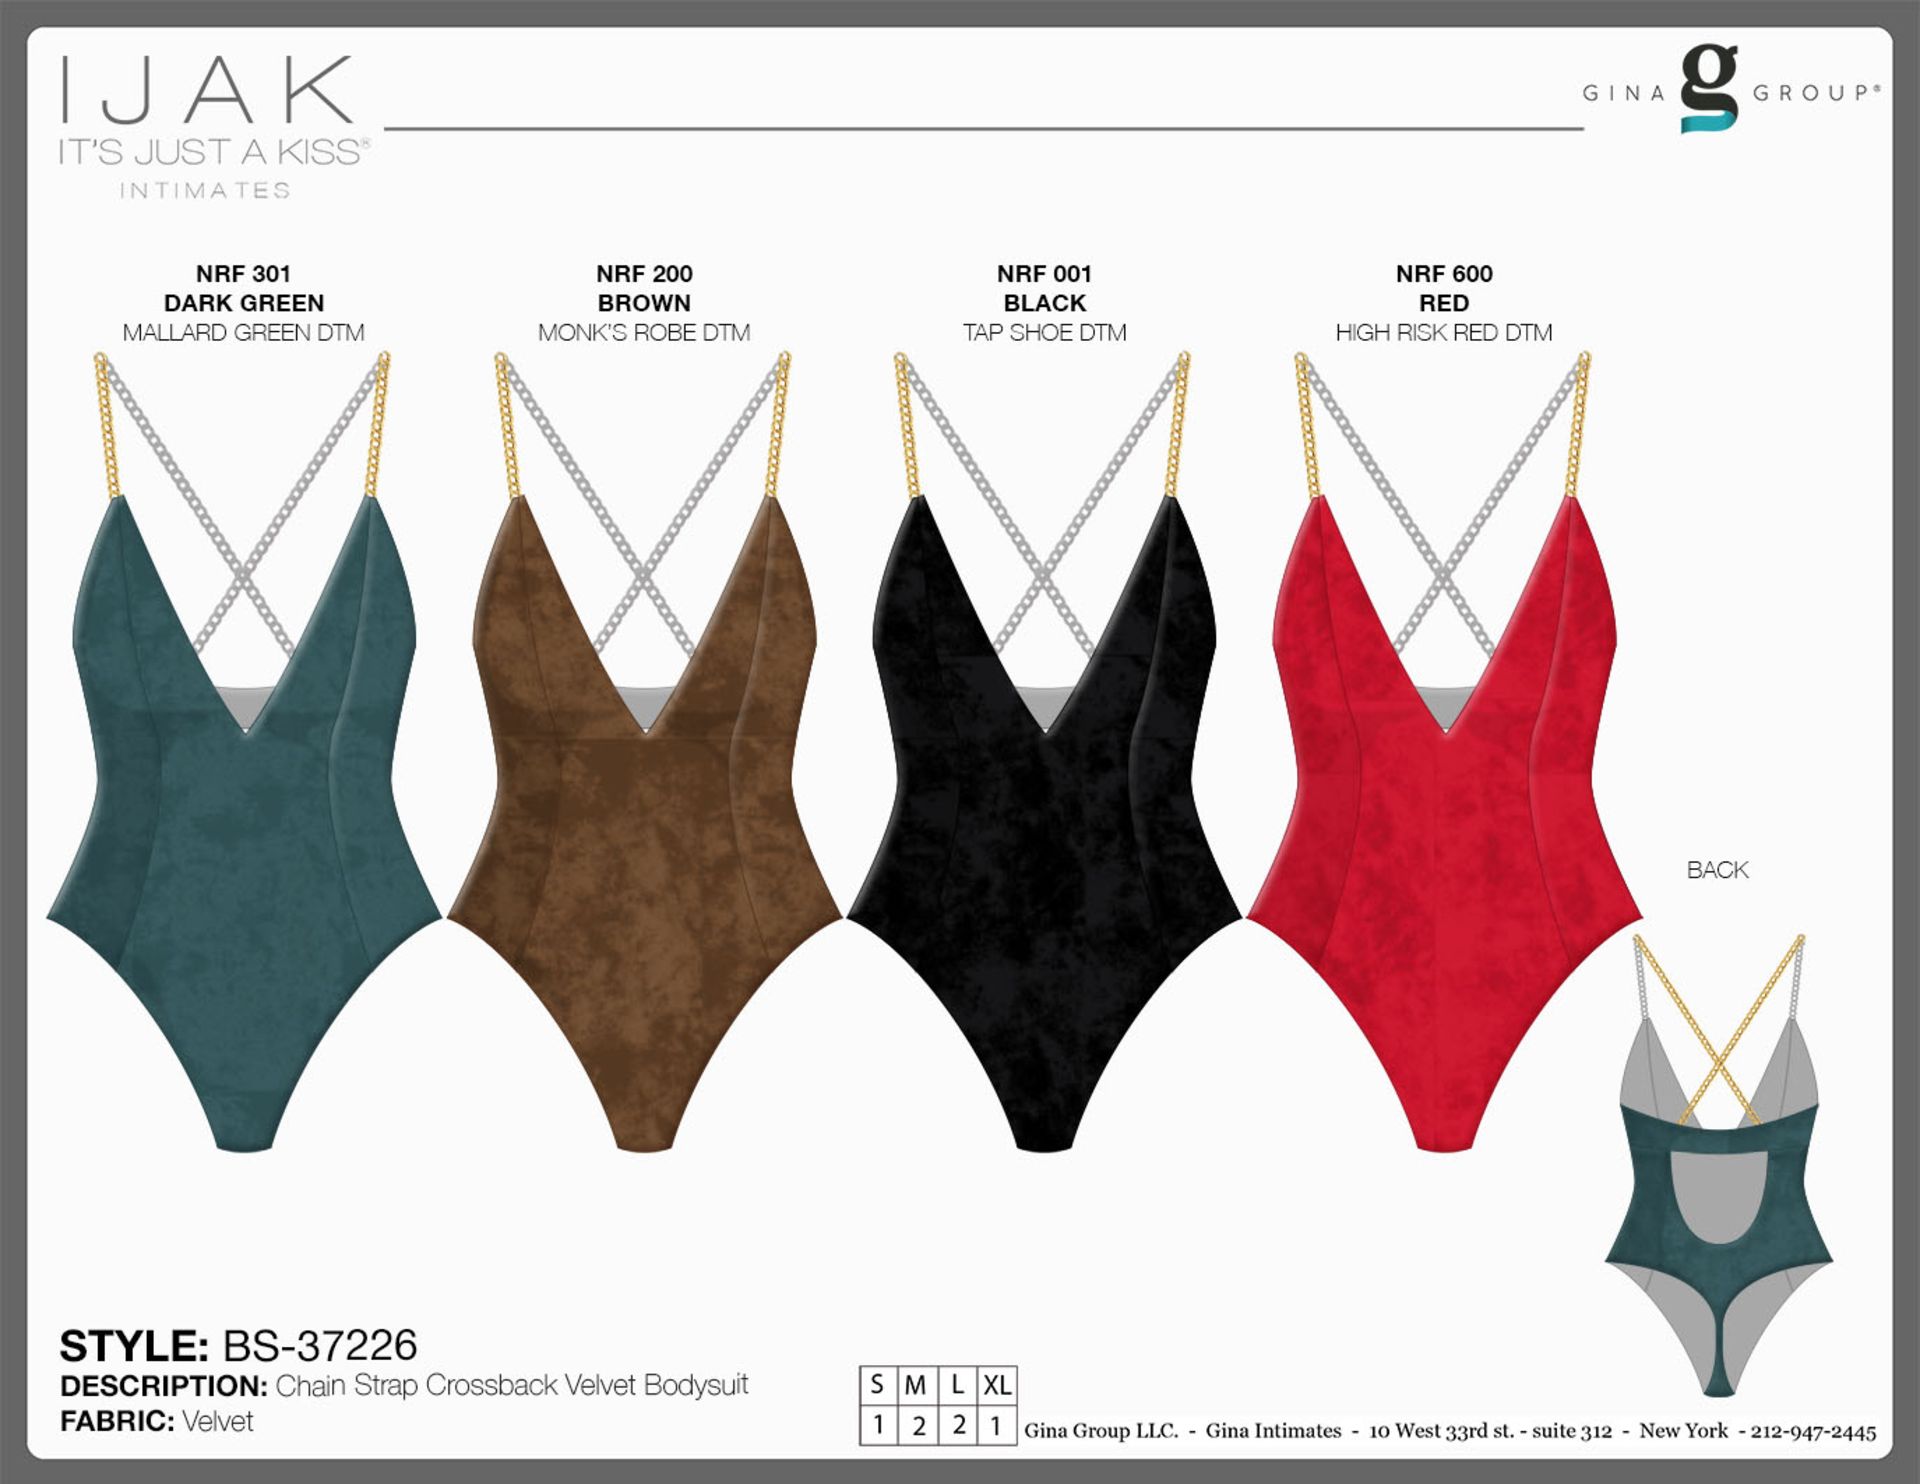 4x pallets containing a total of 6156x IJAK body suits in various colours and sizes, all new and